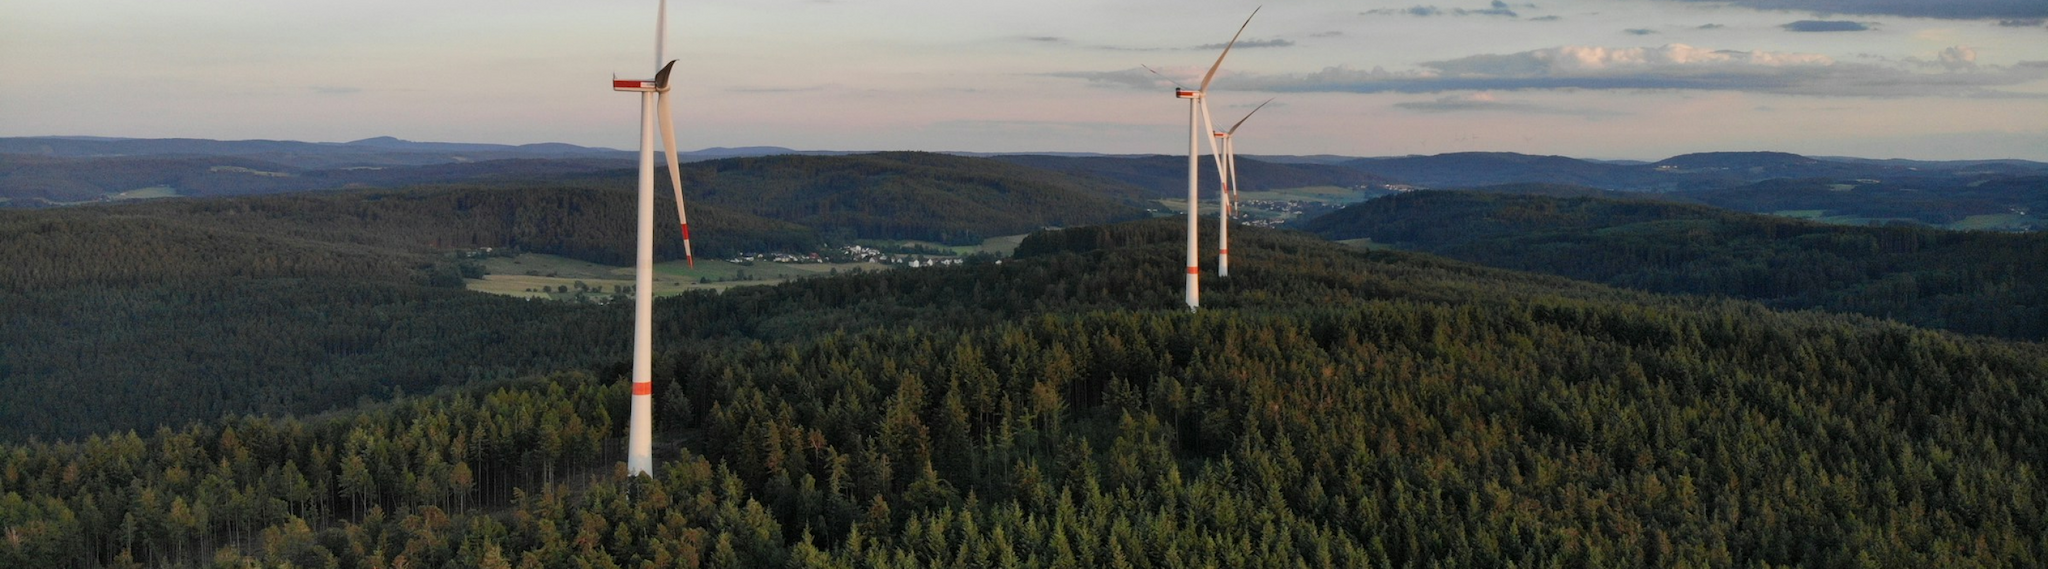 Wind turbines in a towering forest